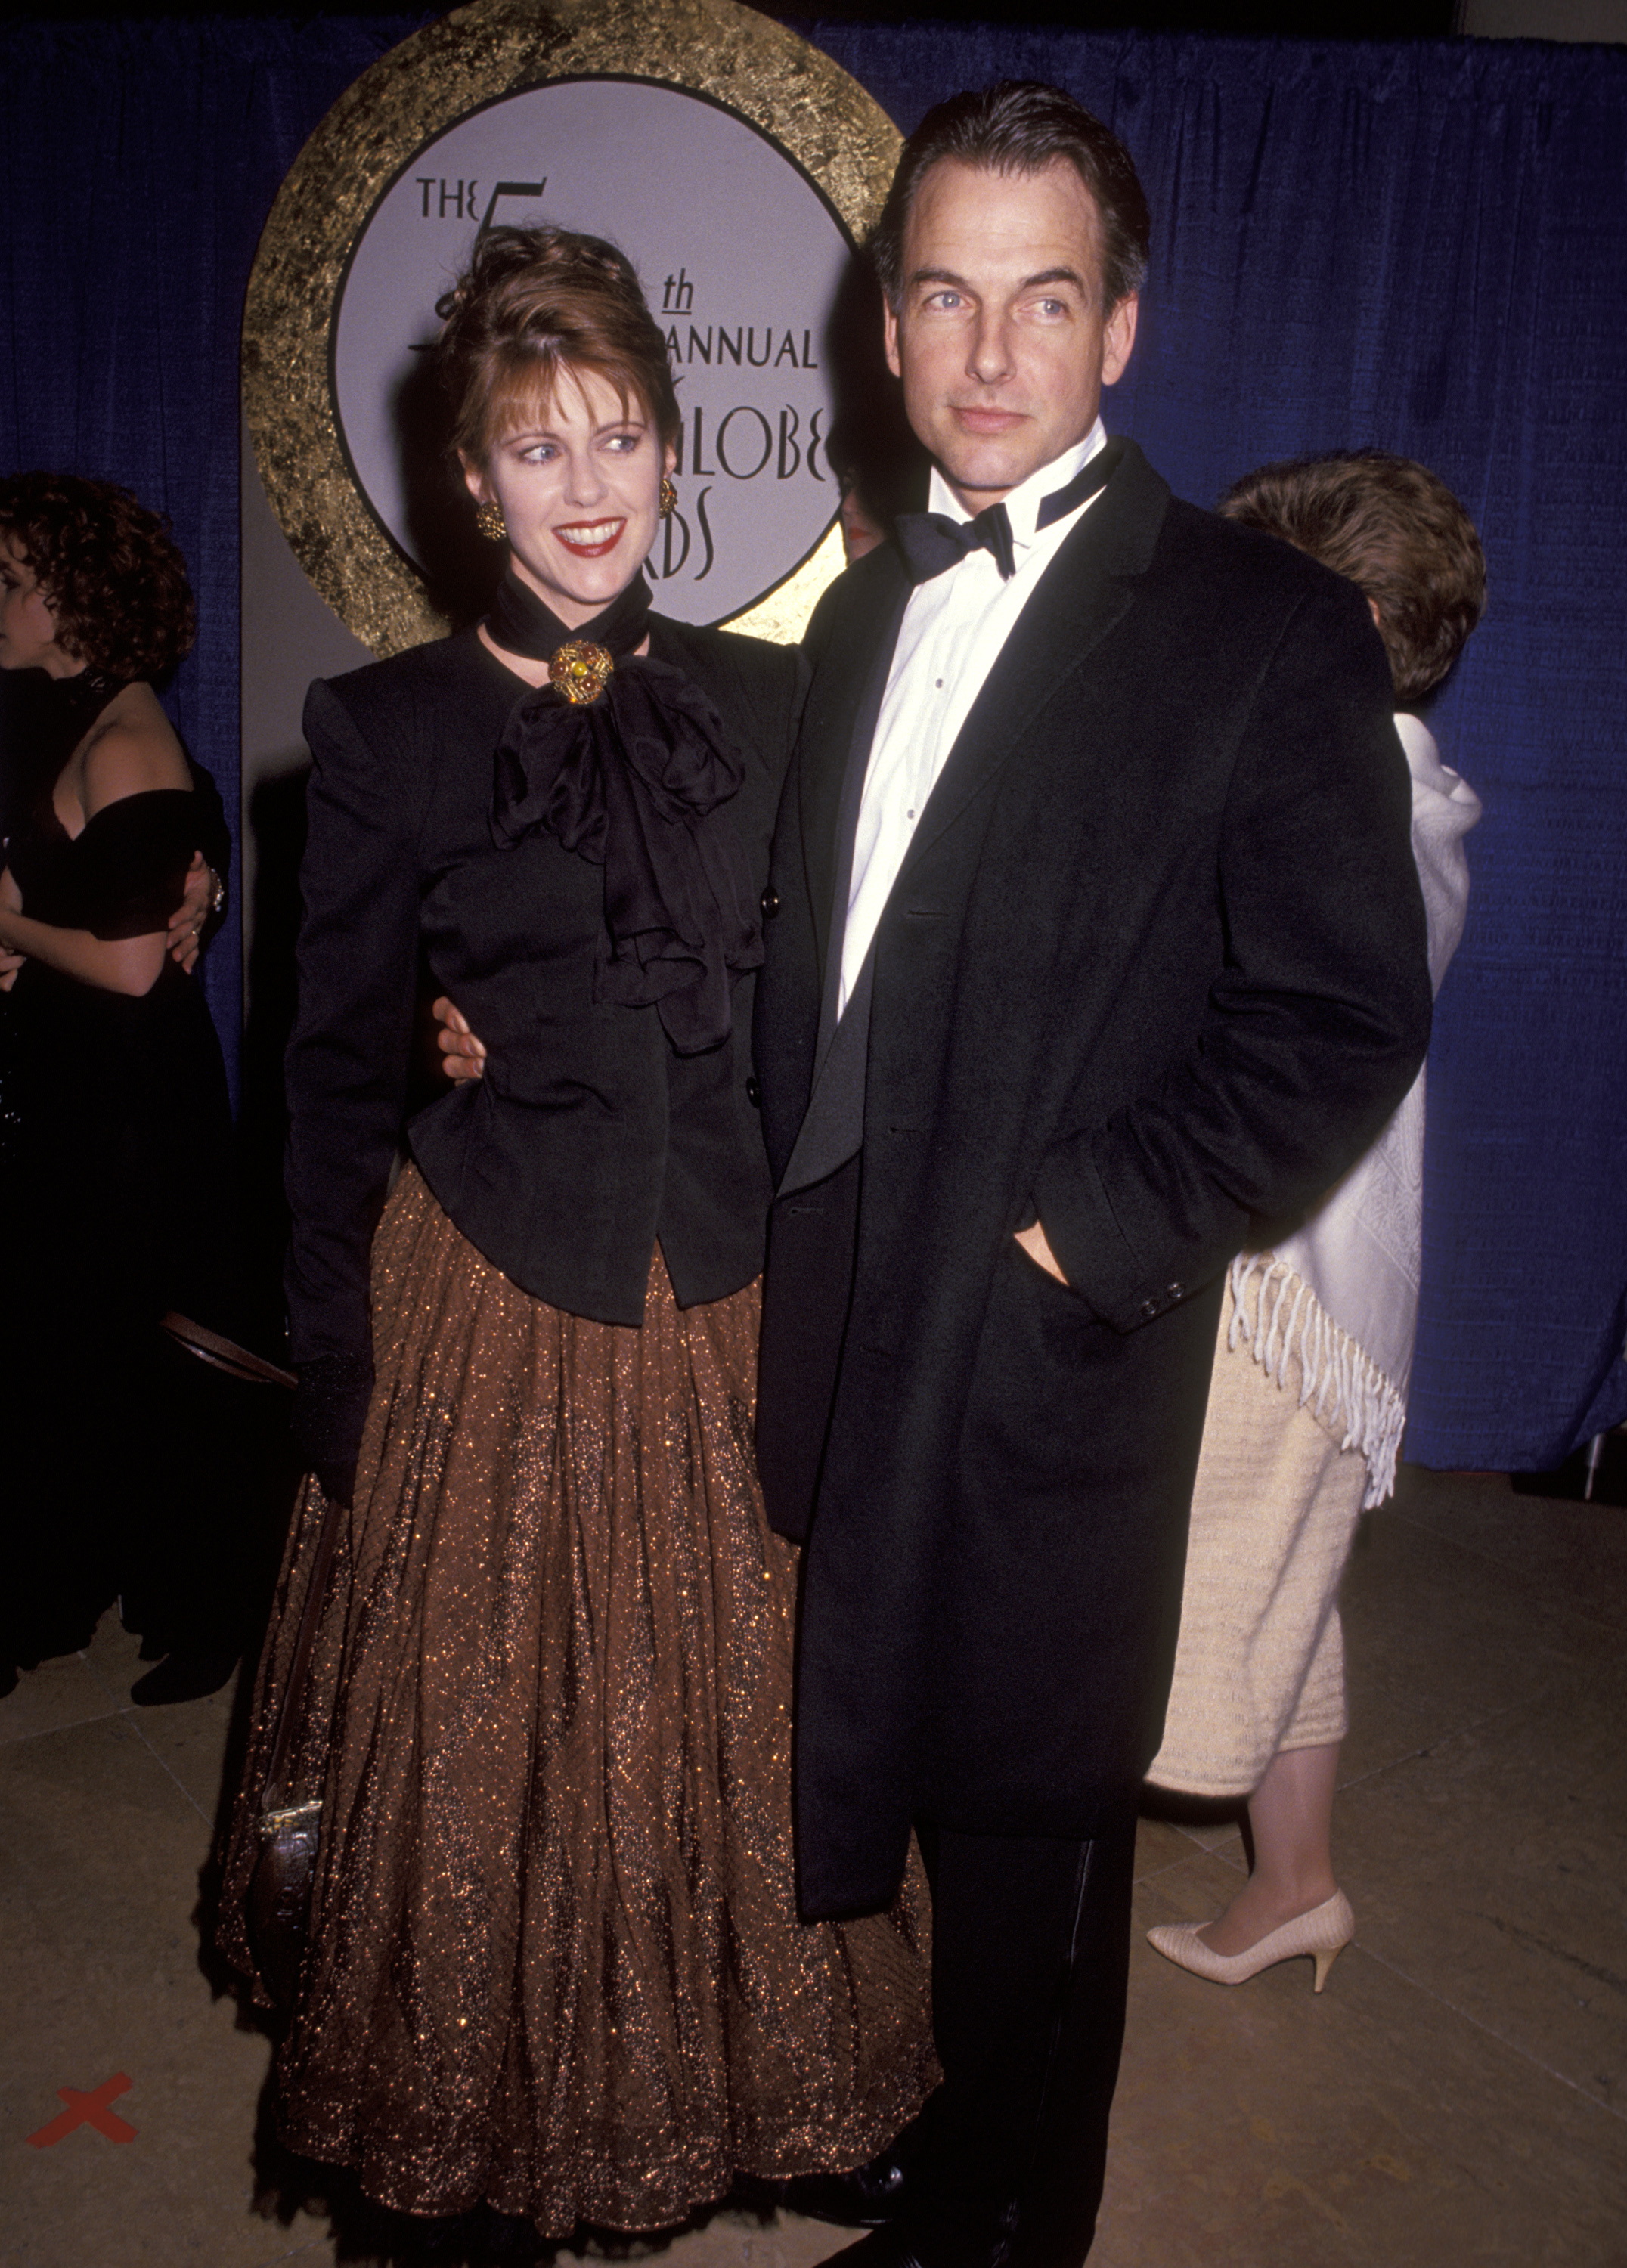 Pam Dawber and Mark Harmon at The 50th Annual Golden Globe Awards in 1993 | Source: Getty Images